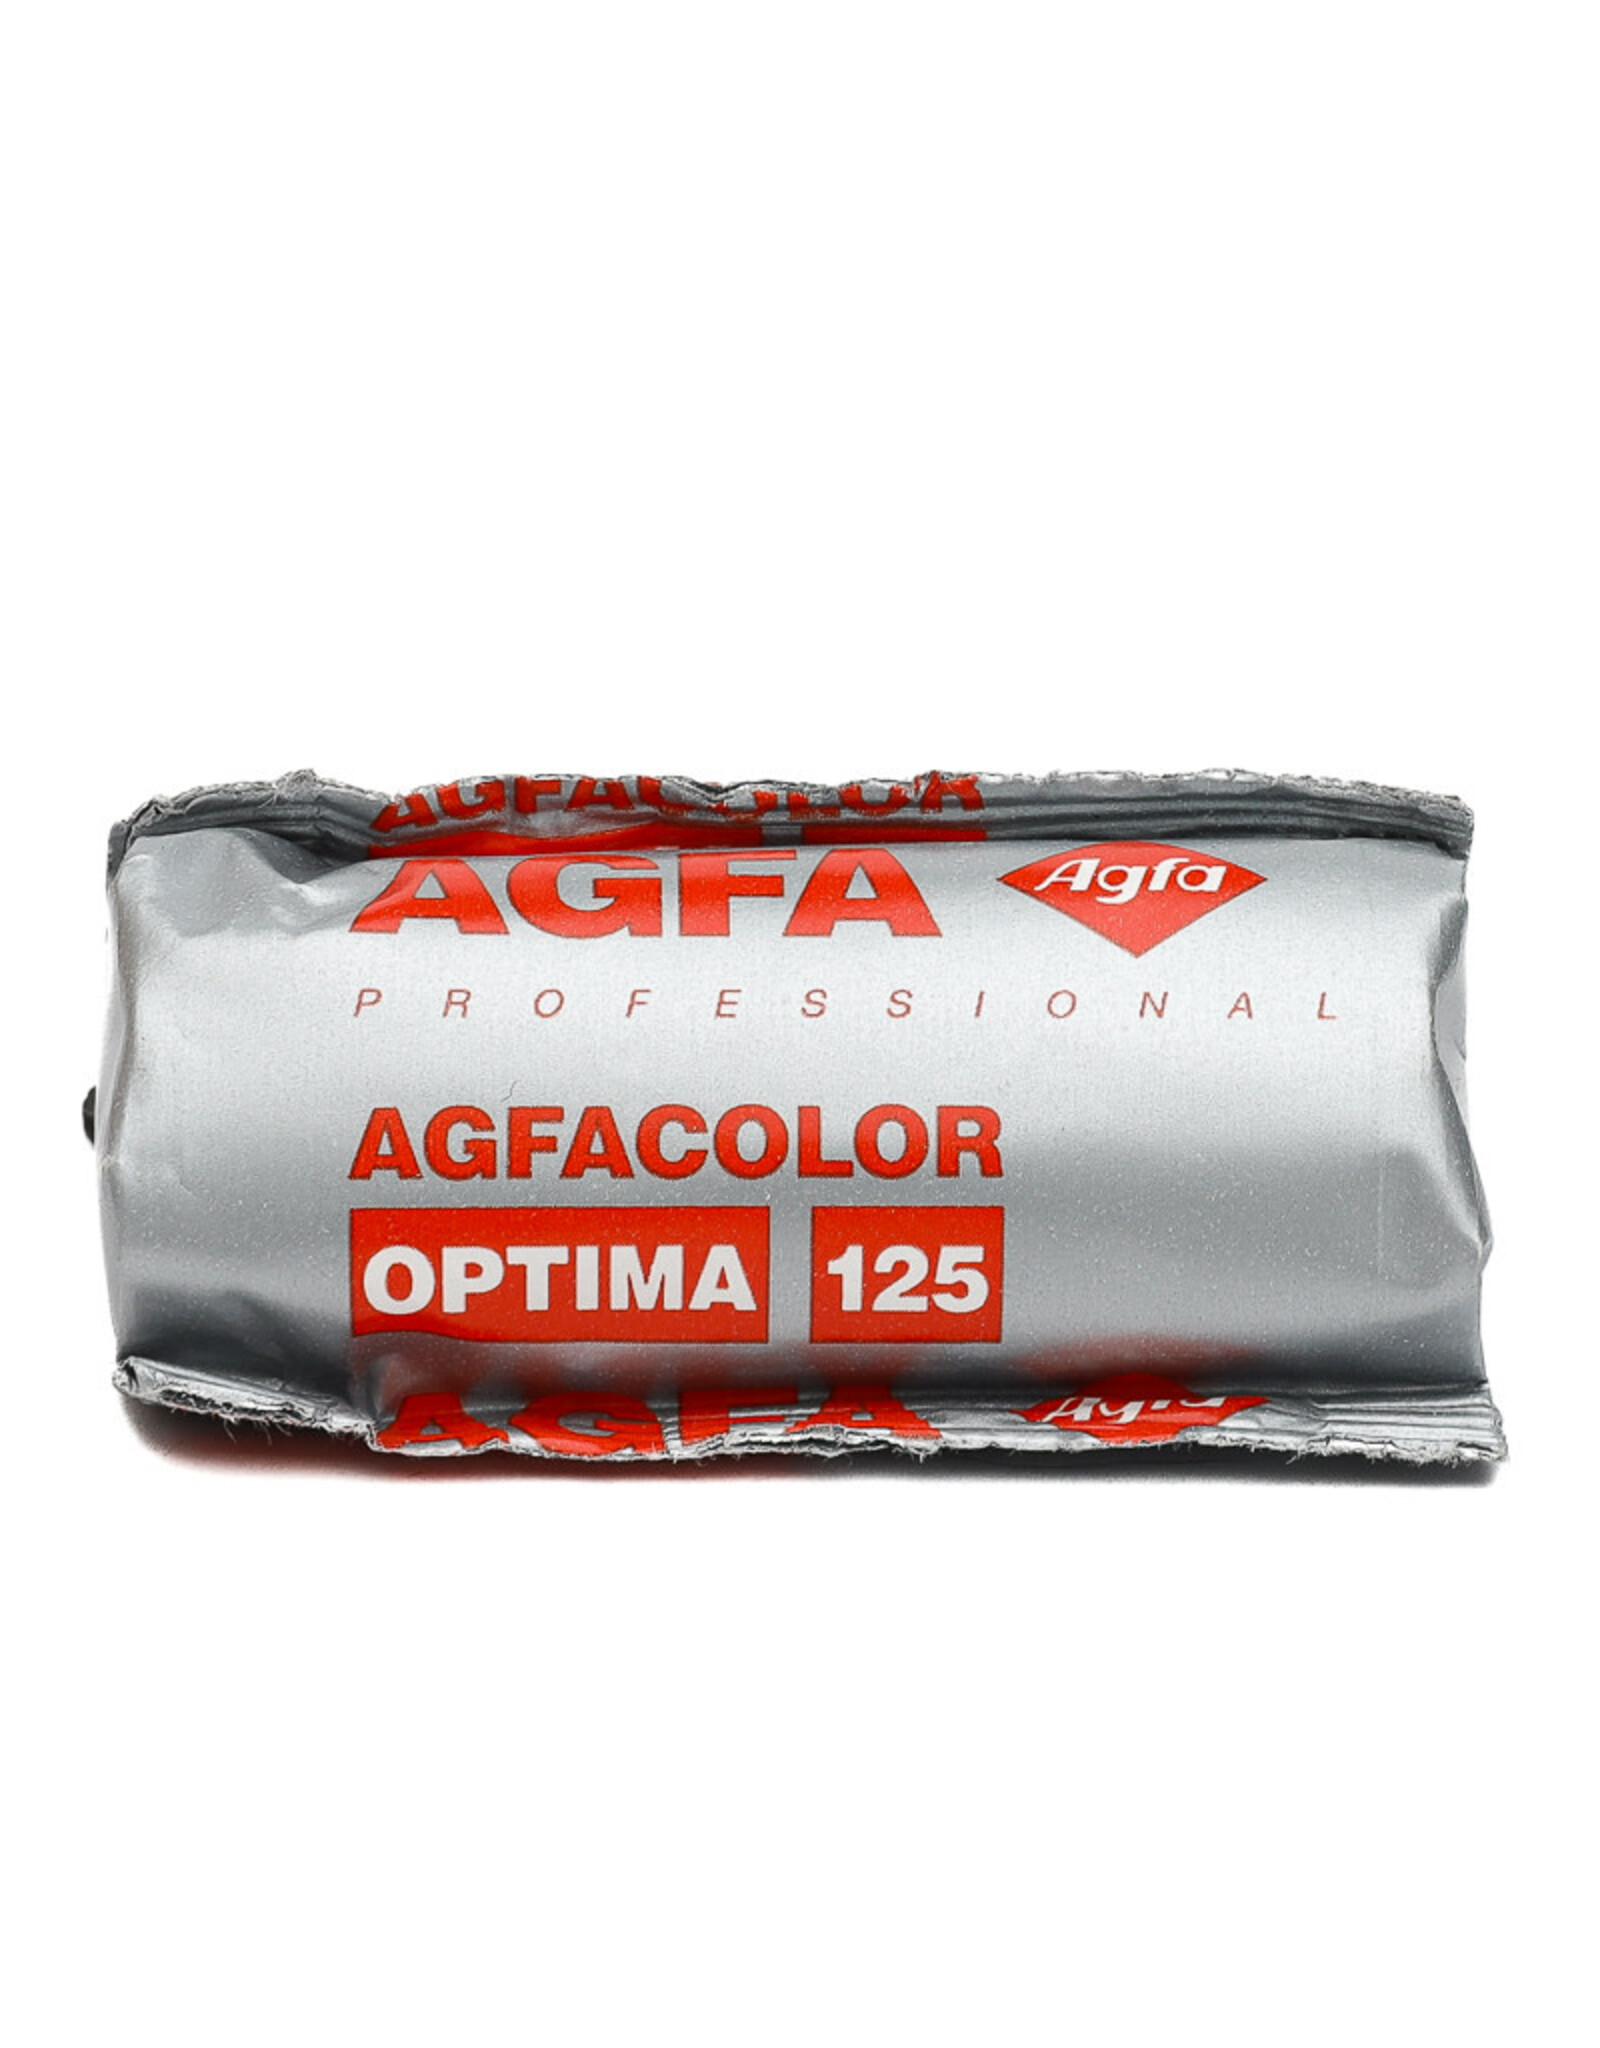 AGFA AgfaPhoto OPTIMA 100 ISO 120 Color Negative film (expired 04/97, stored frozen)